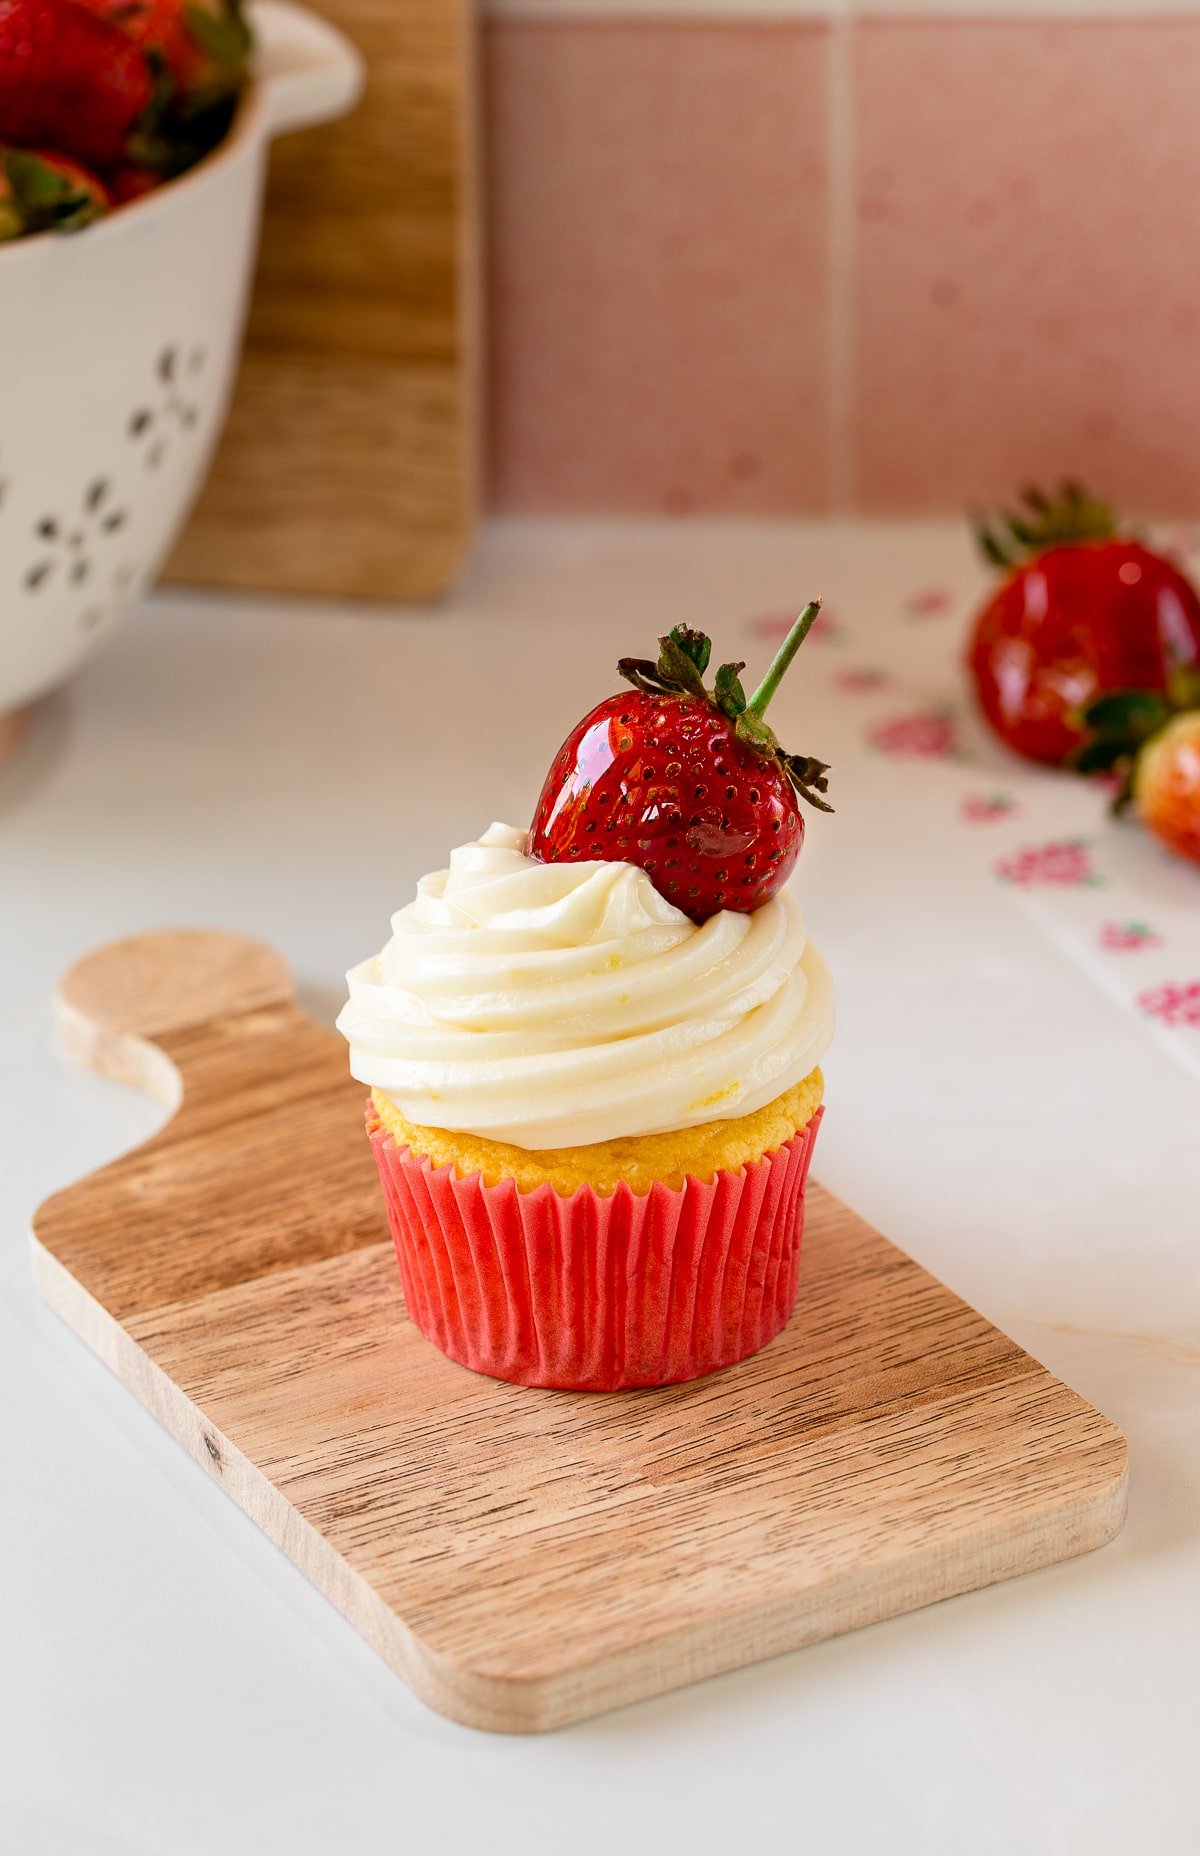 candied strawberry on cupcake.